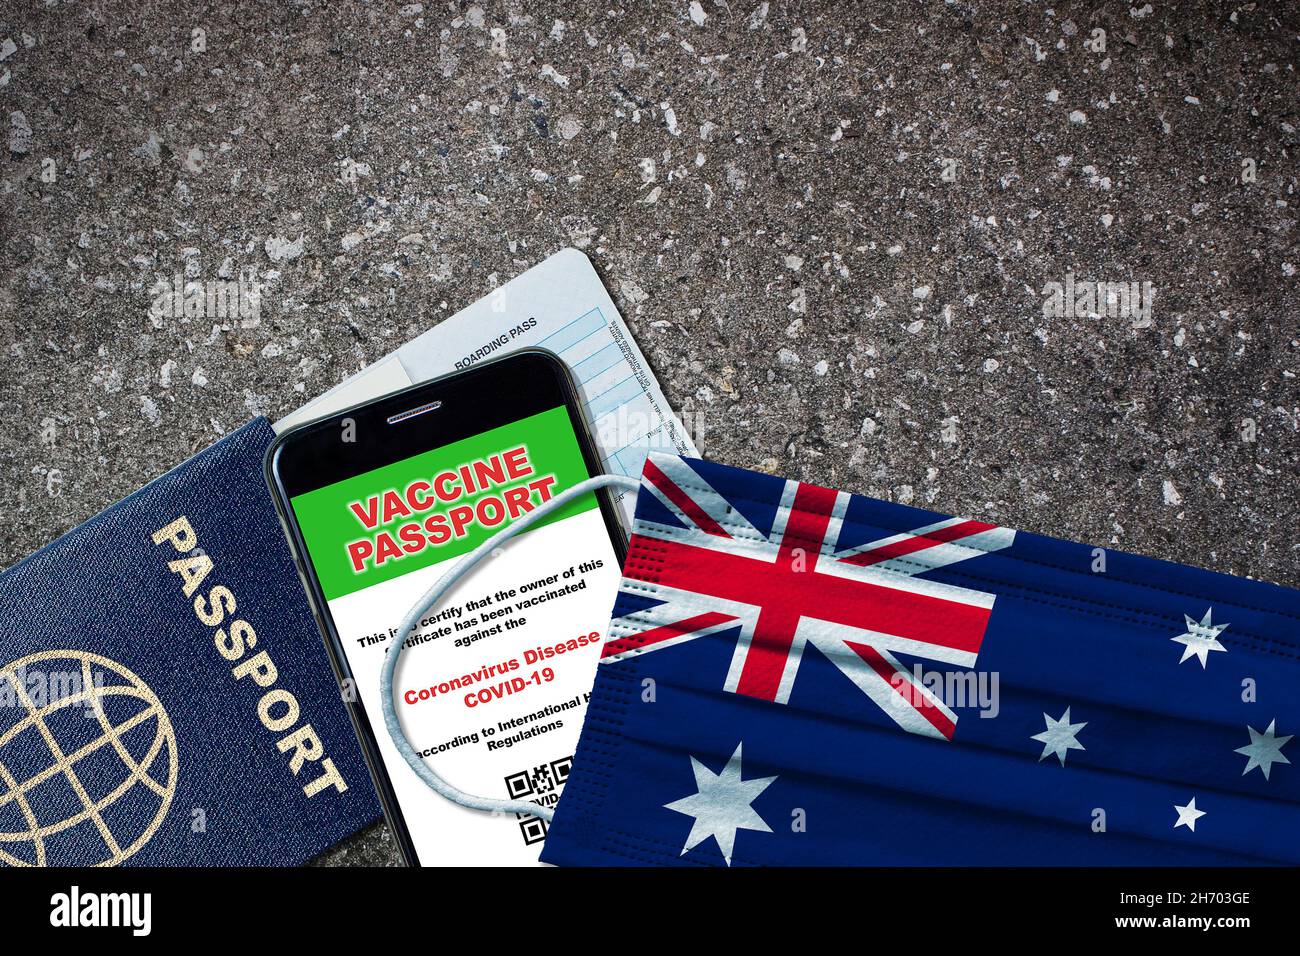 Australia new normal travel with passport, digital vaccine on smartphone, boarding pass and face mask with Australian flag. Vaccine passport concept w Stock Photo